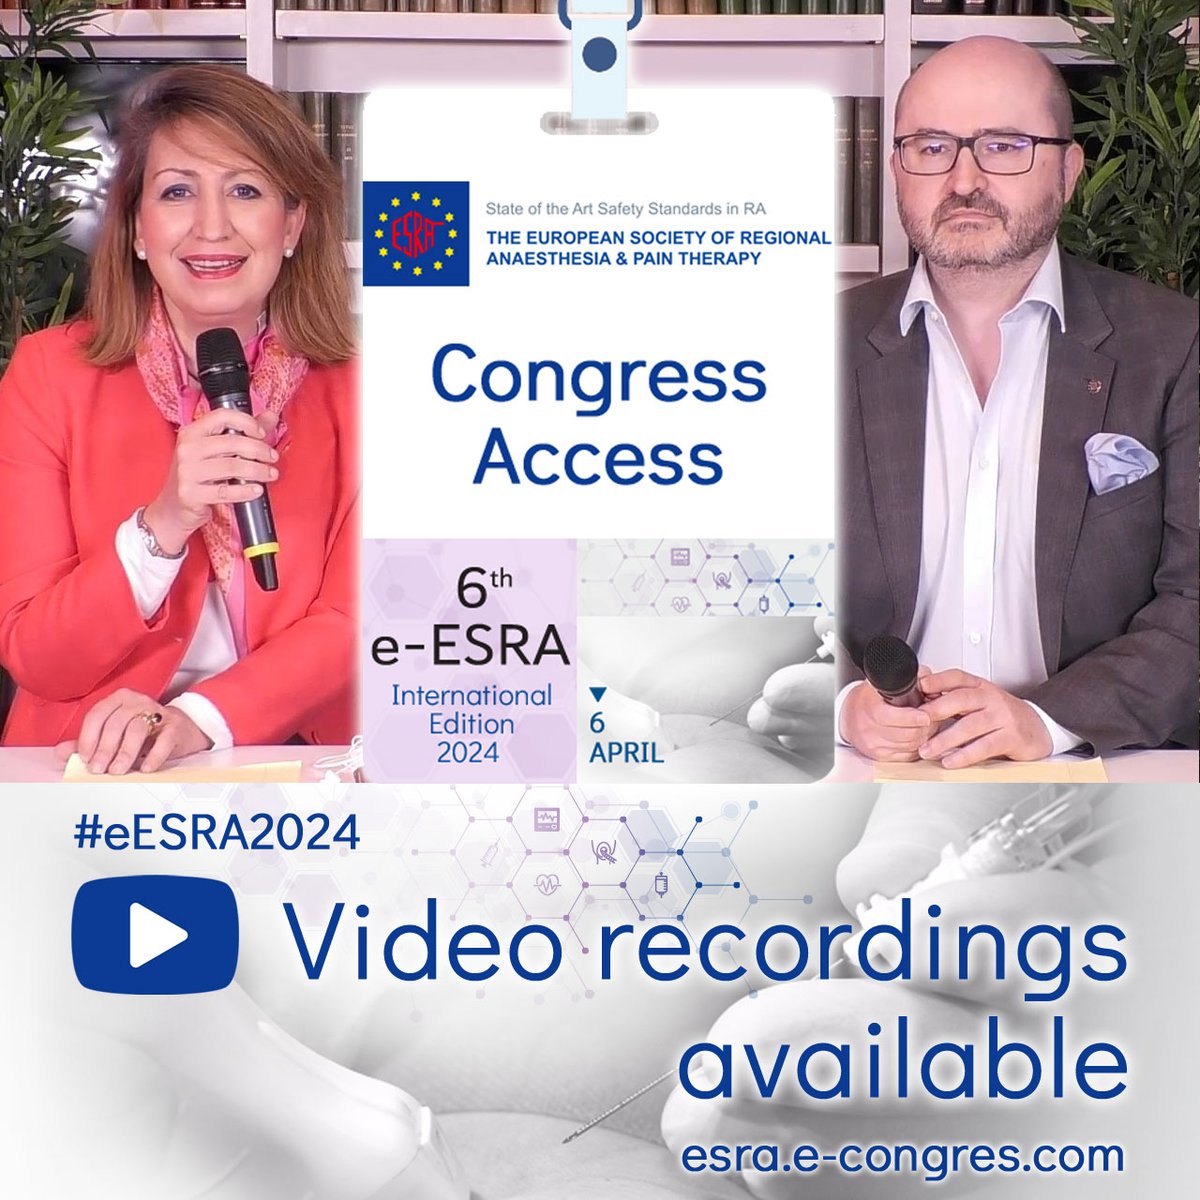 You couldn't watch the #eESRA2024 or missed parts of it? The videos are now available online! 👉 esra.e-congres.com ✅ FREE for members 🕒 9h programme on RA & Pain Therapy 👨‍🔬 +50 Key Opinion Leaders 🇪🇺 The TARA sessions are also accessible on studio 3